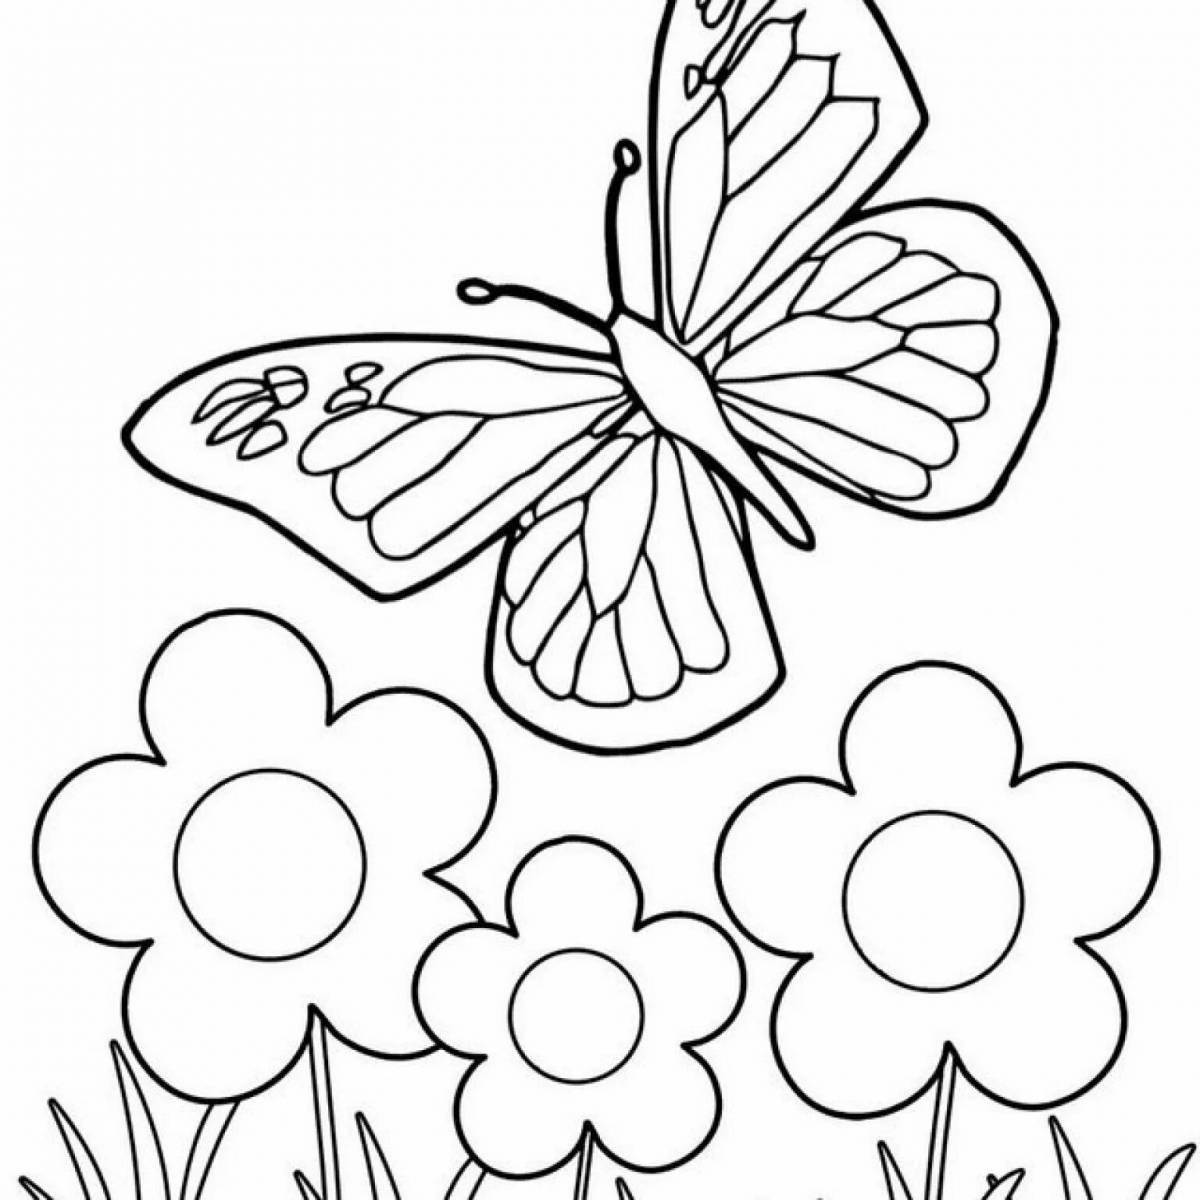 Adorable meadow coloring book for kids